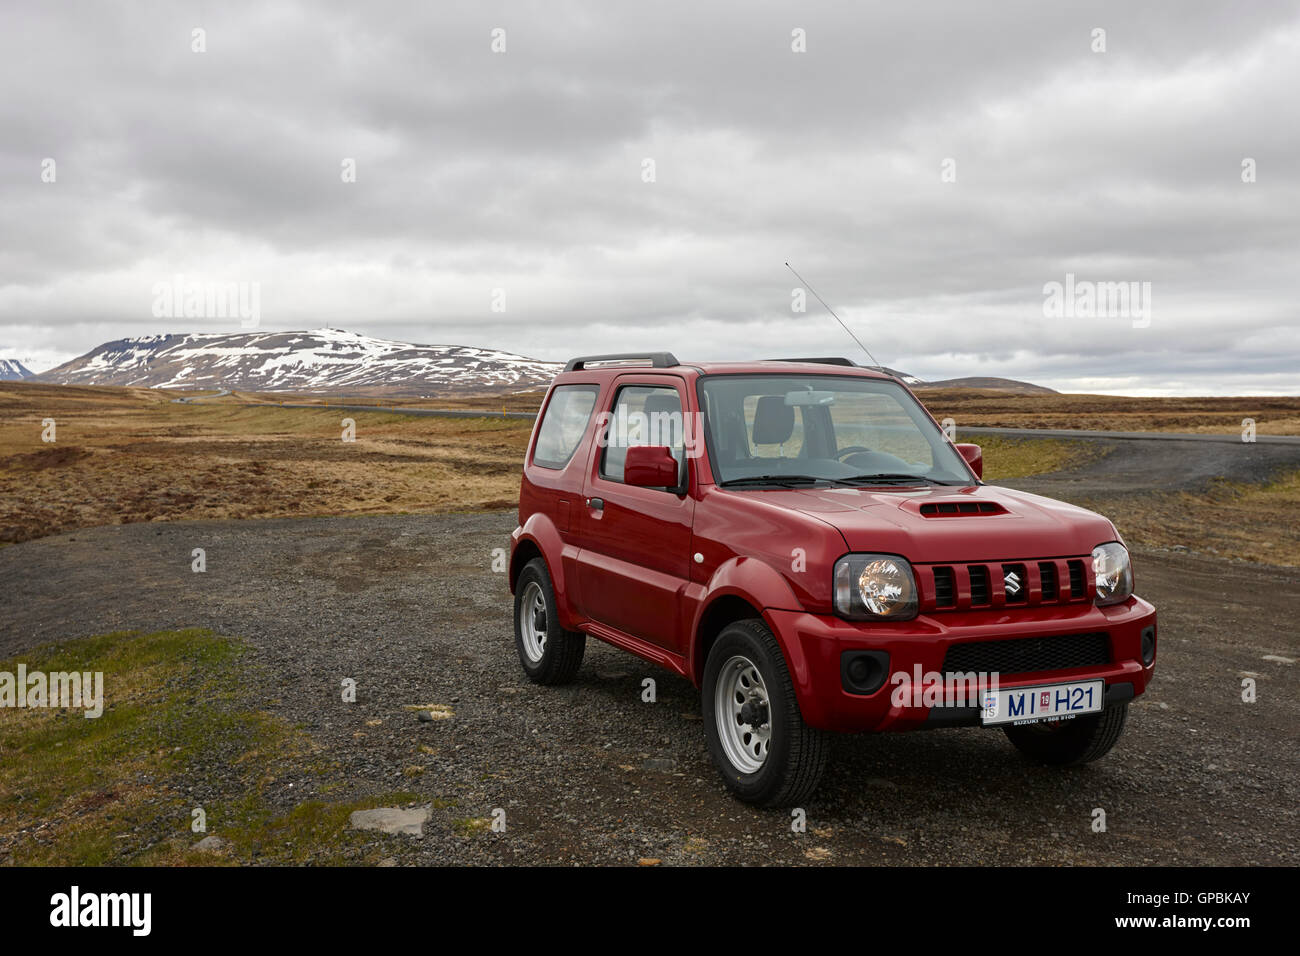 Suzuki jimny 4x4 off road hire rental car in rural remote countryside driving in Iceland Stock Photo